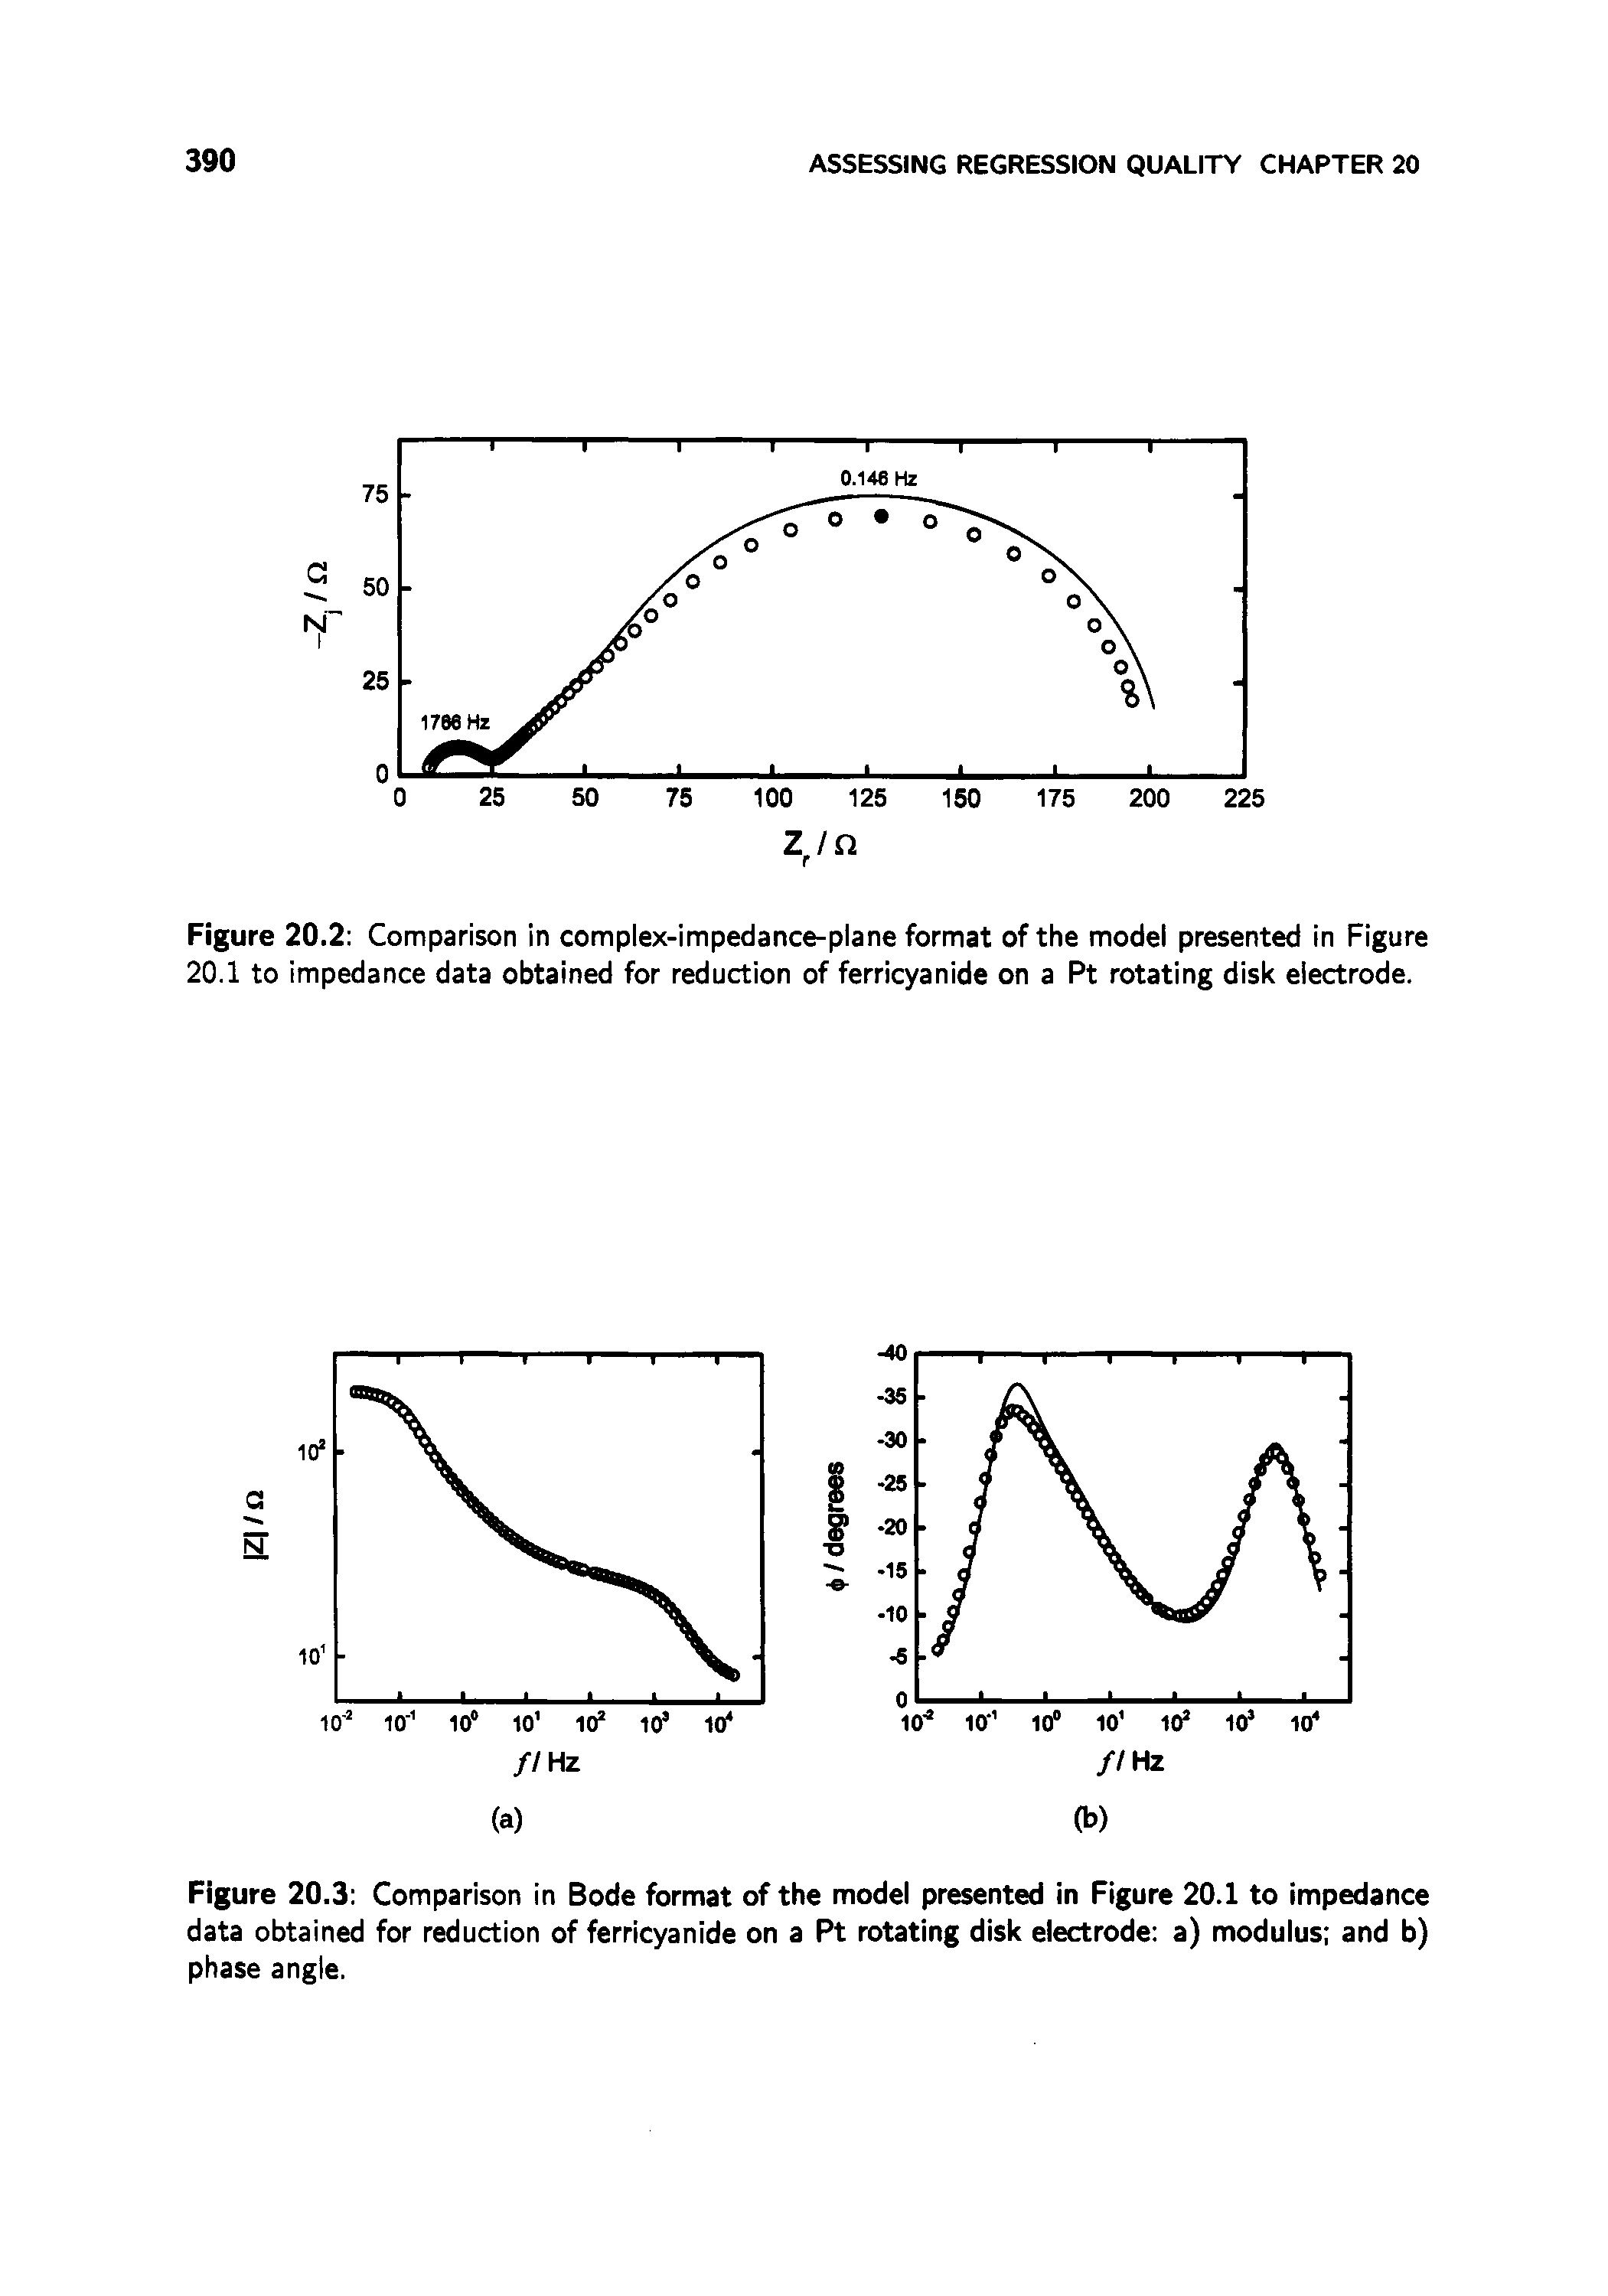 Figure 20.3 Comparison in Bode format of the model presented in Figure 20.1 to impedance data obtained for reduction of ferricyanide on a Pt rotating disk electrode a) modulus and b) phase angle.